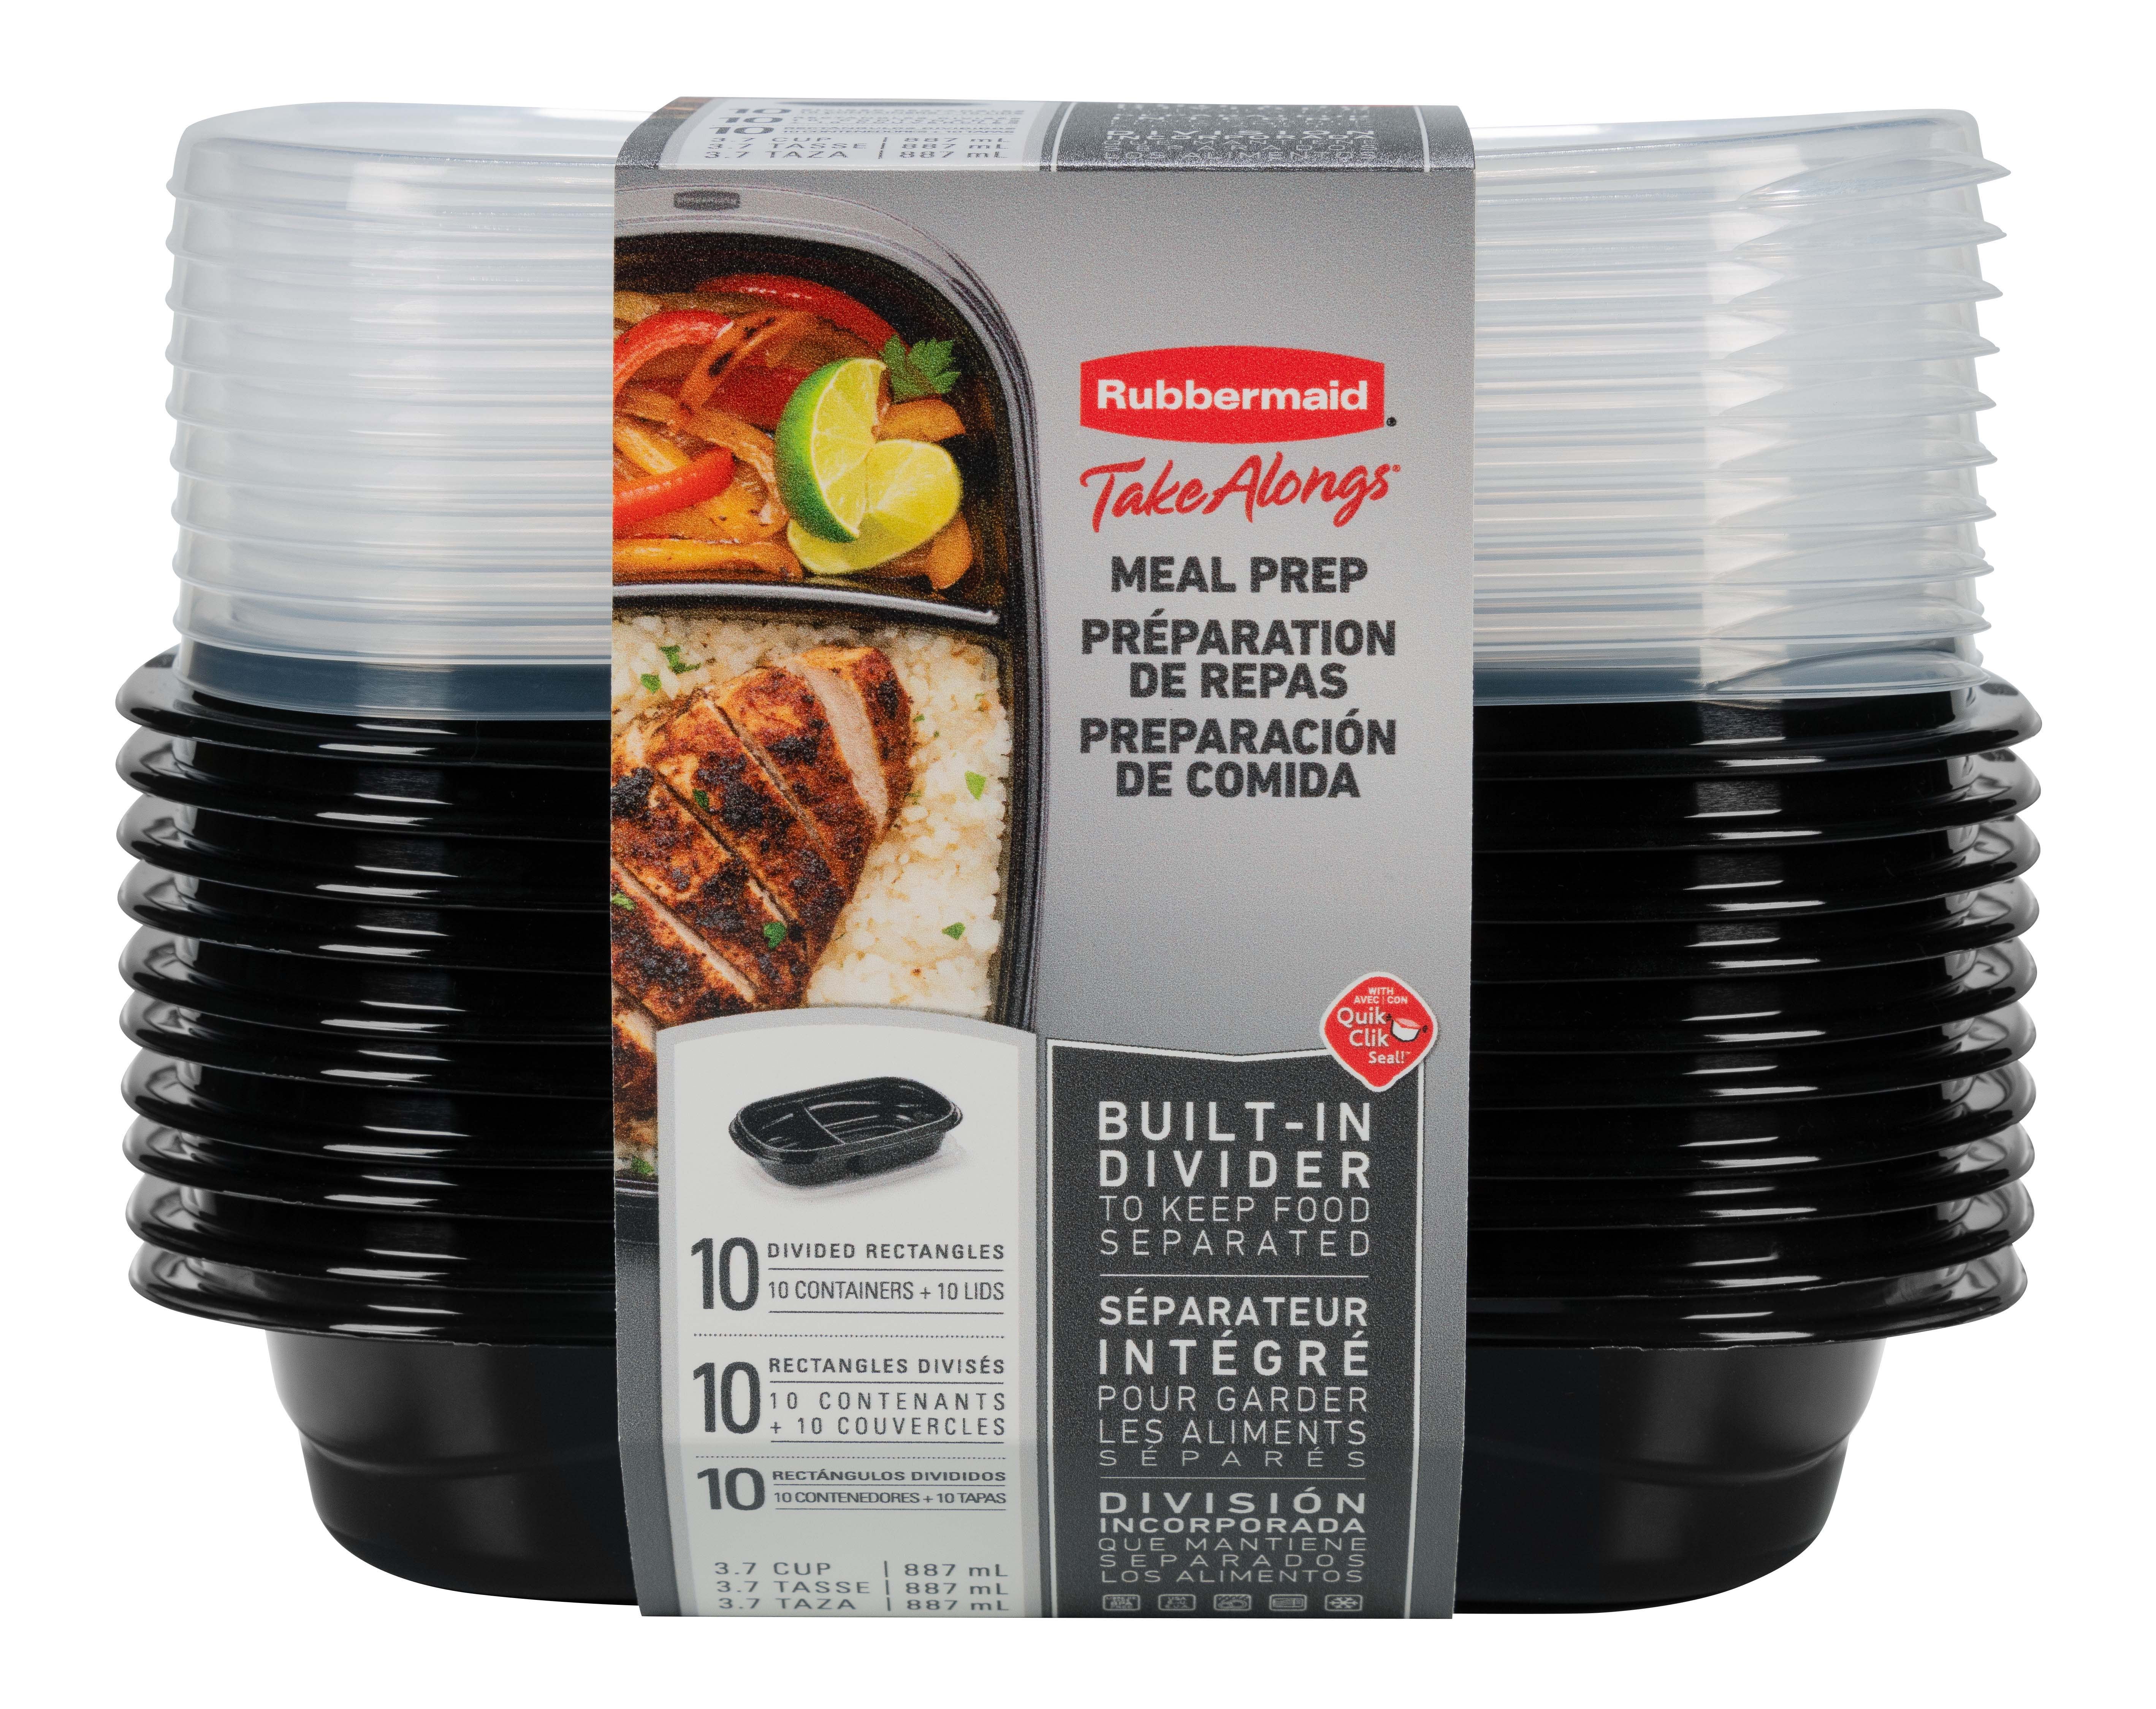 Rubbermaid Takealongs 20-piece Meal Prep, Food Storage Container Sets